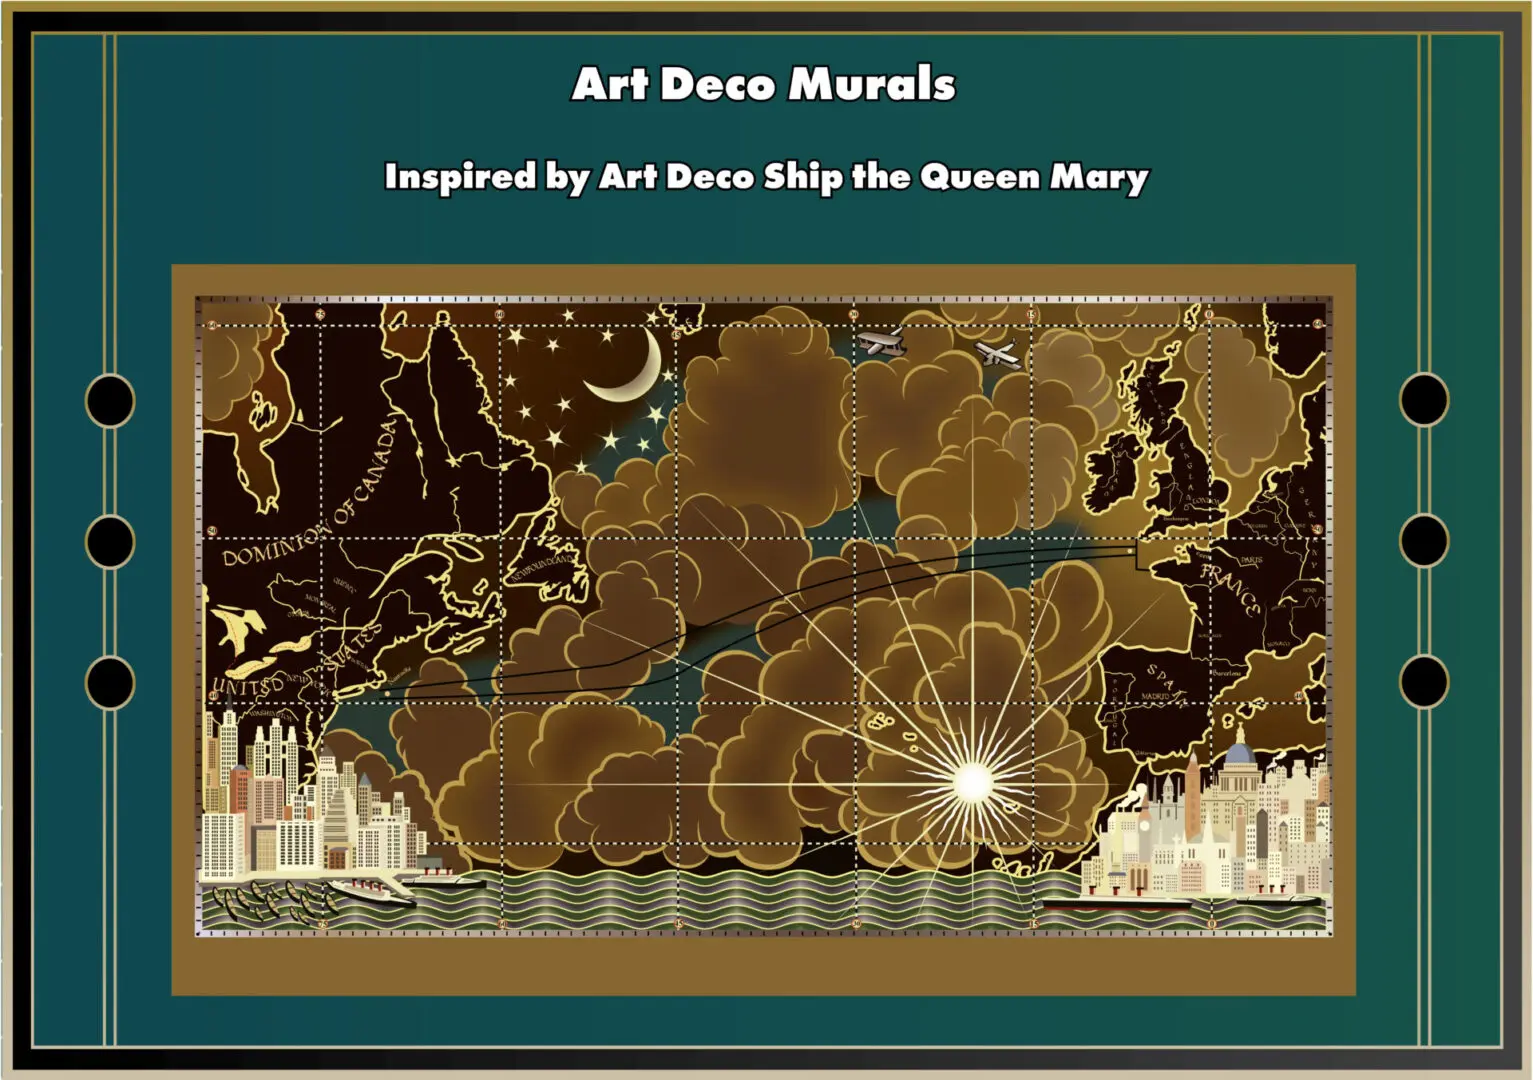 Murals inspired by the Art Deco Ship The Queen Mary